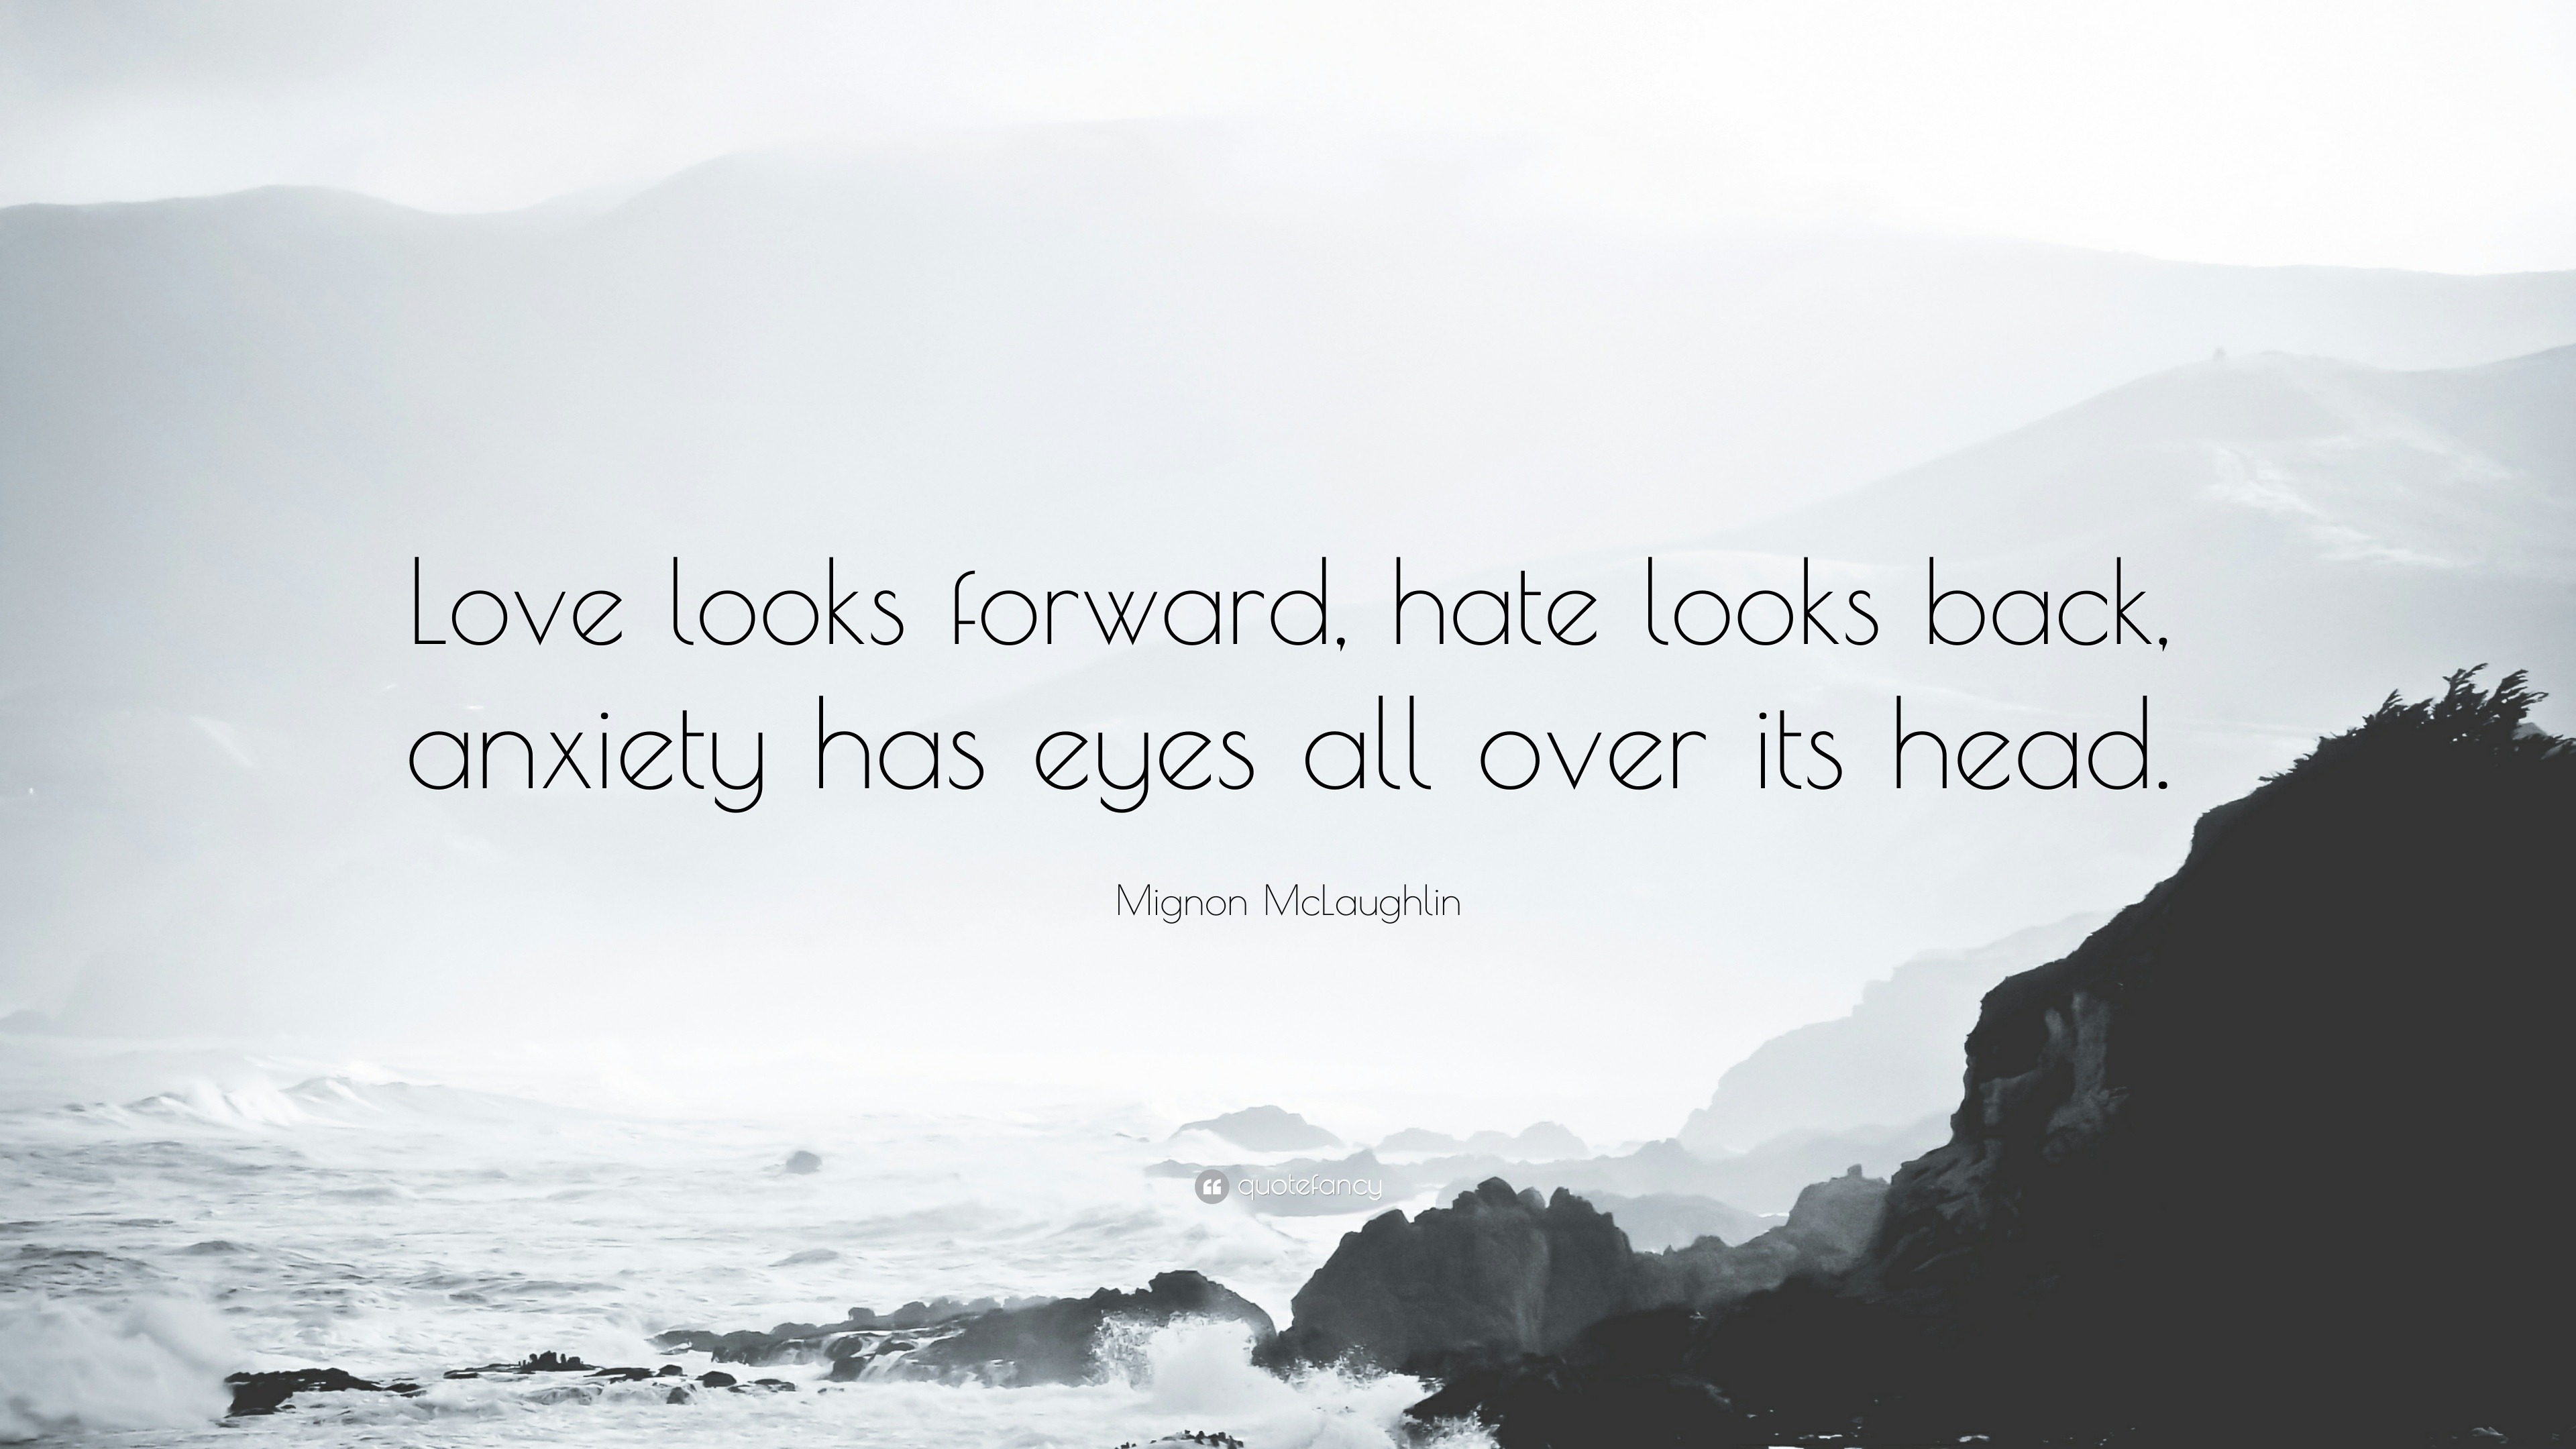 Mignon McLaughlin Quote “Love looks forward hate looks back anxiety has eyes